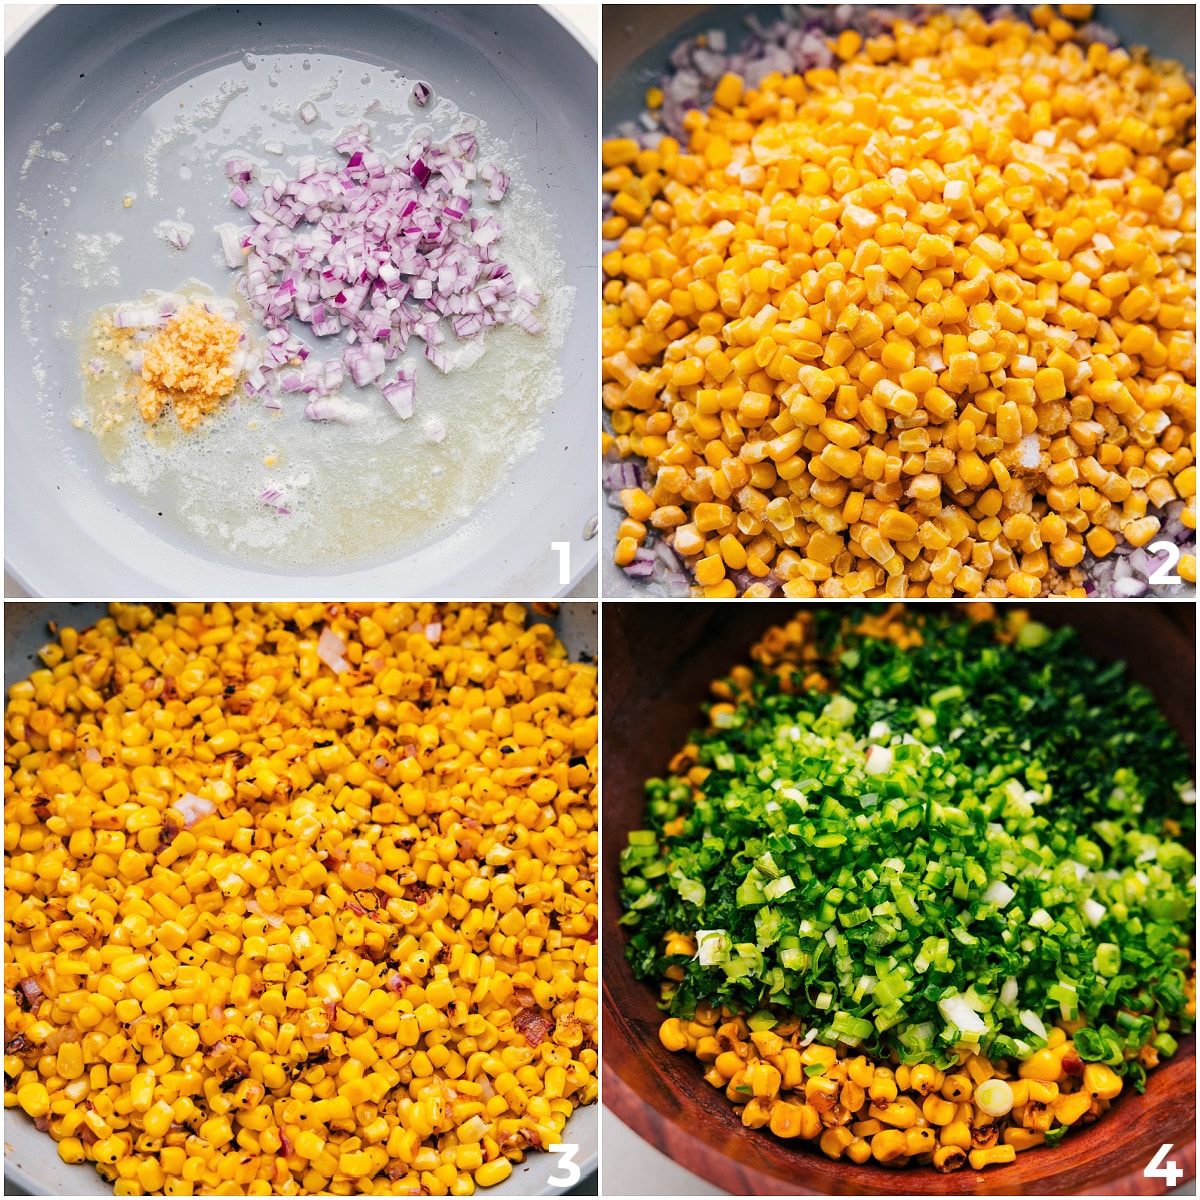 The garlic, onions, and corn being sautéed in a pan and the herbs being added on top of it right off the stove.